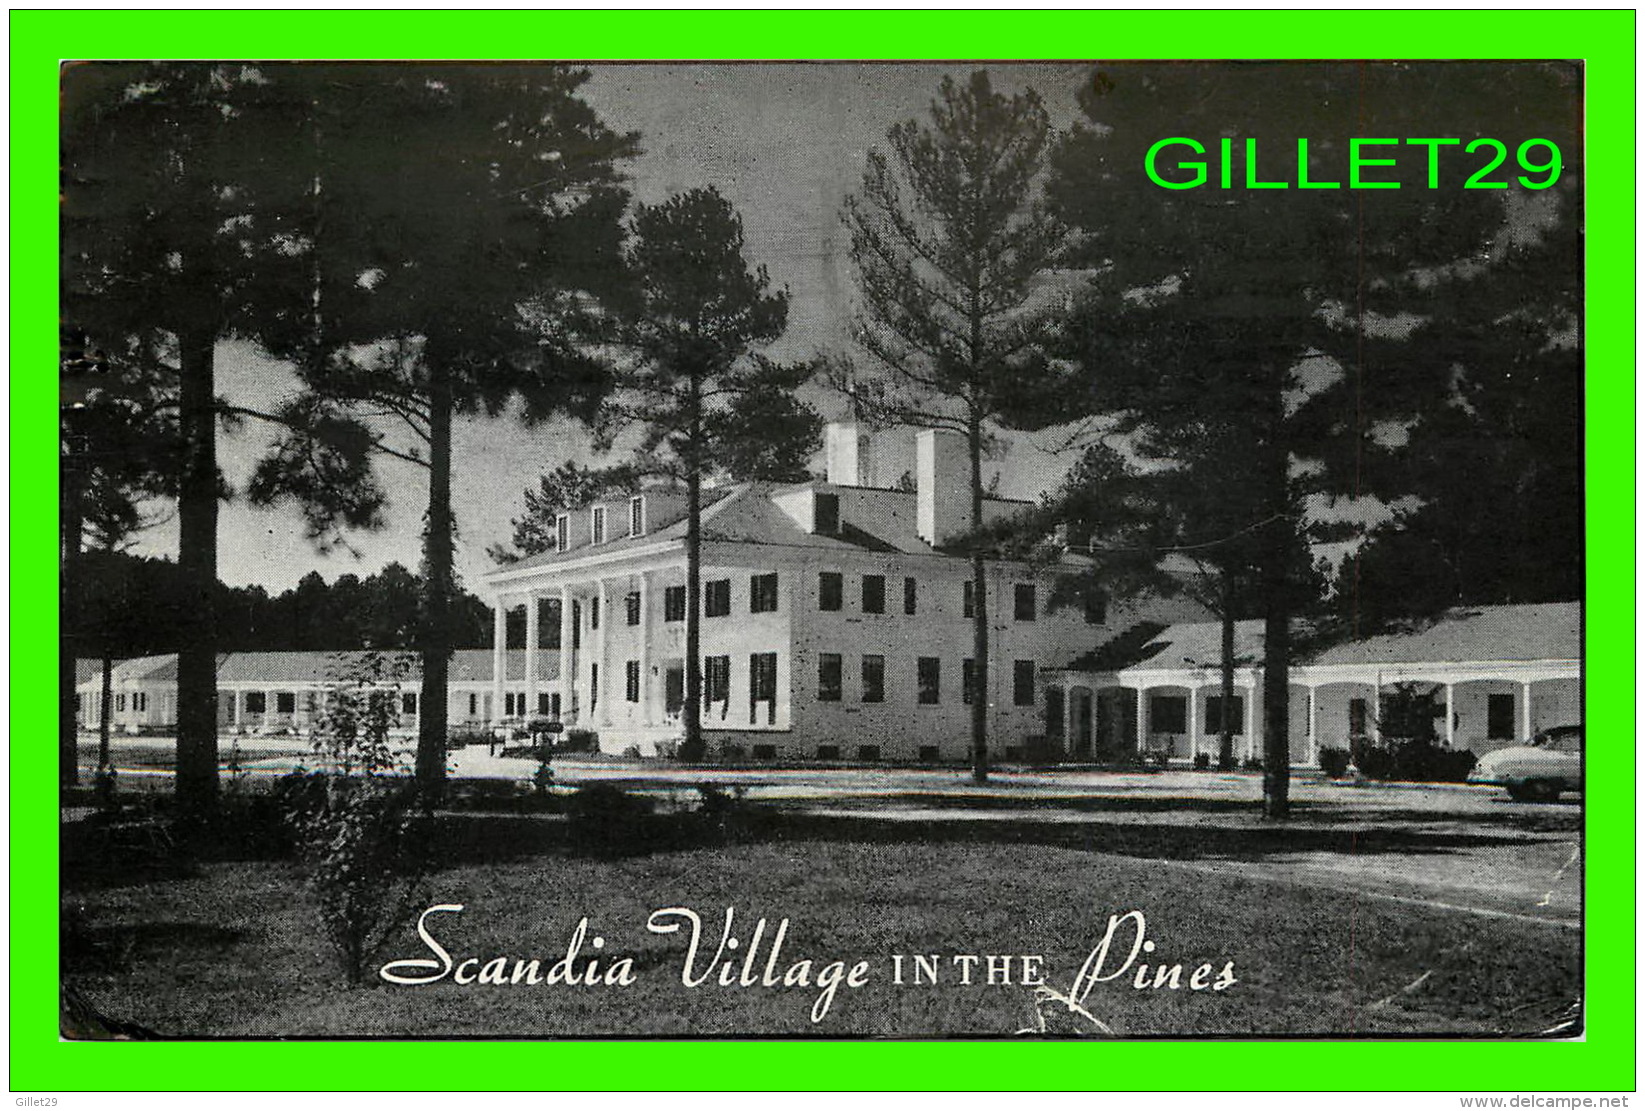 RALEIGH, NC -  SCANDIA VILLAGE IN THE PINES MOTOR COURT - TRAVEL IN 1958 - - Raleigh